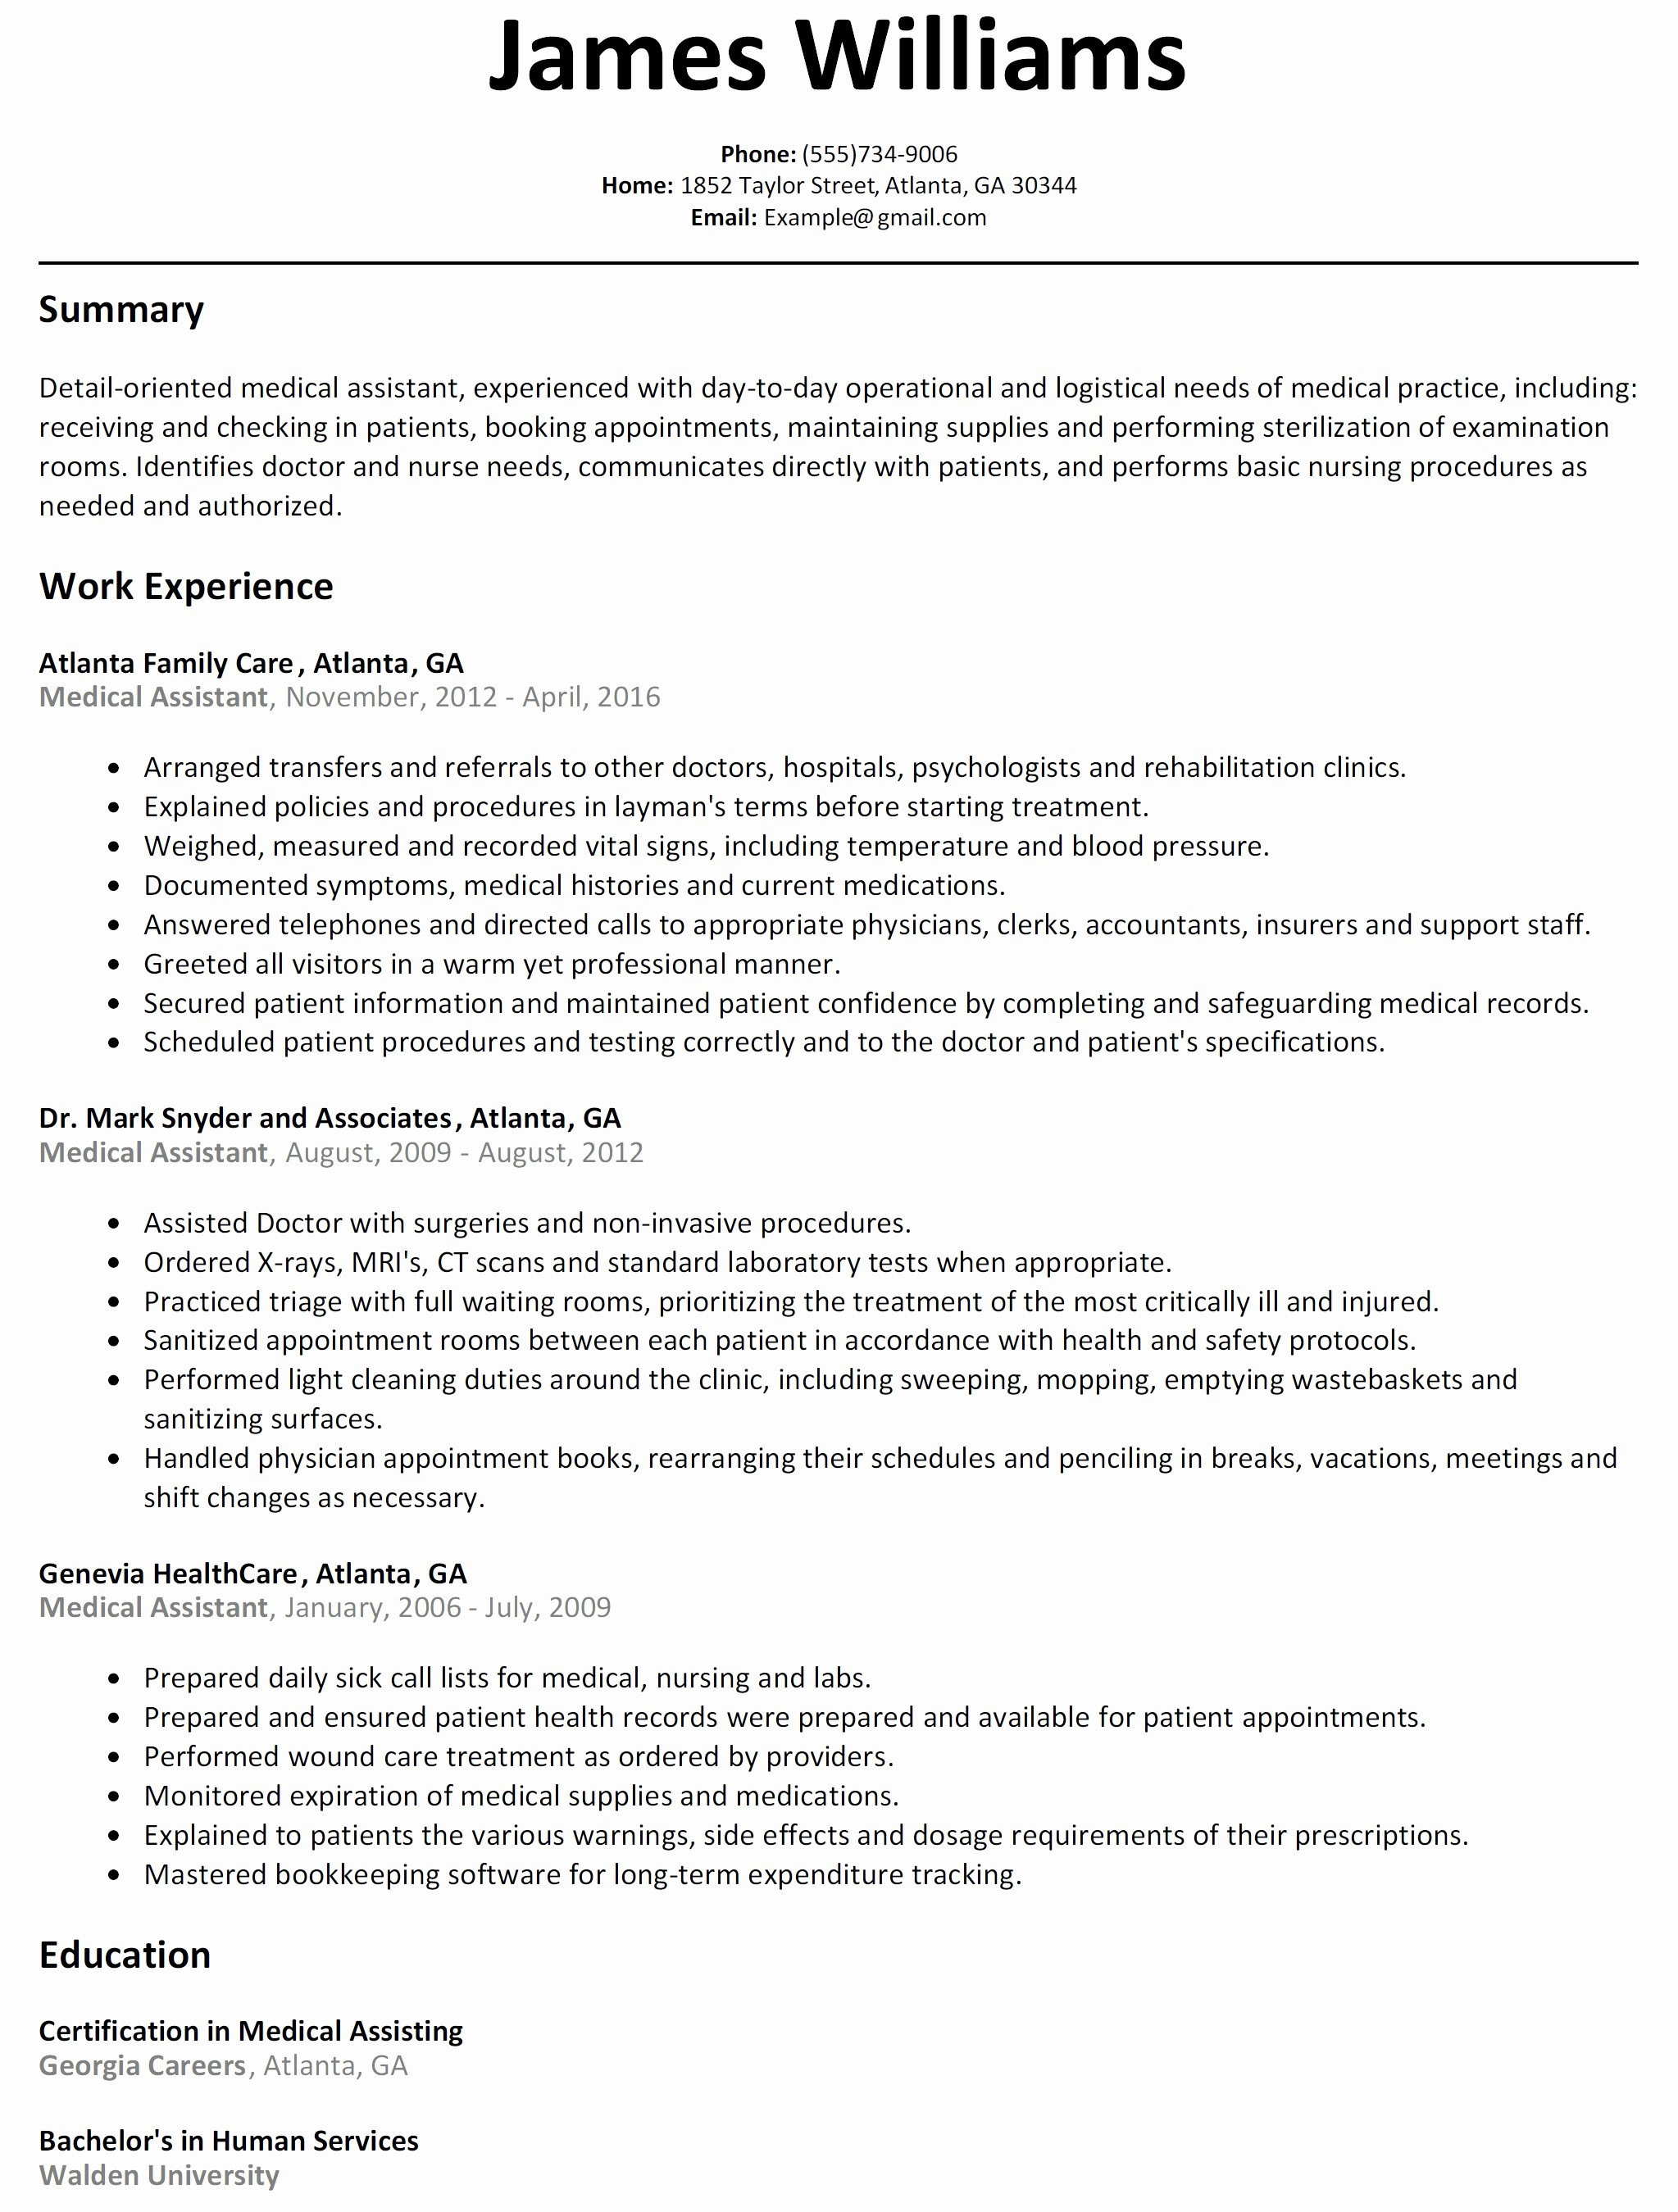 Resume For Customer Service Bjective For Resume Customer Service Fresh Call Center Resume Resume Objective For Customer Service Call Center resume for customer service|wikiresume.com